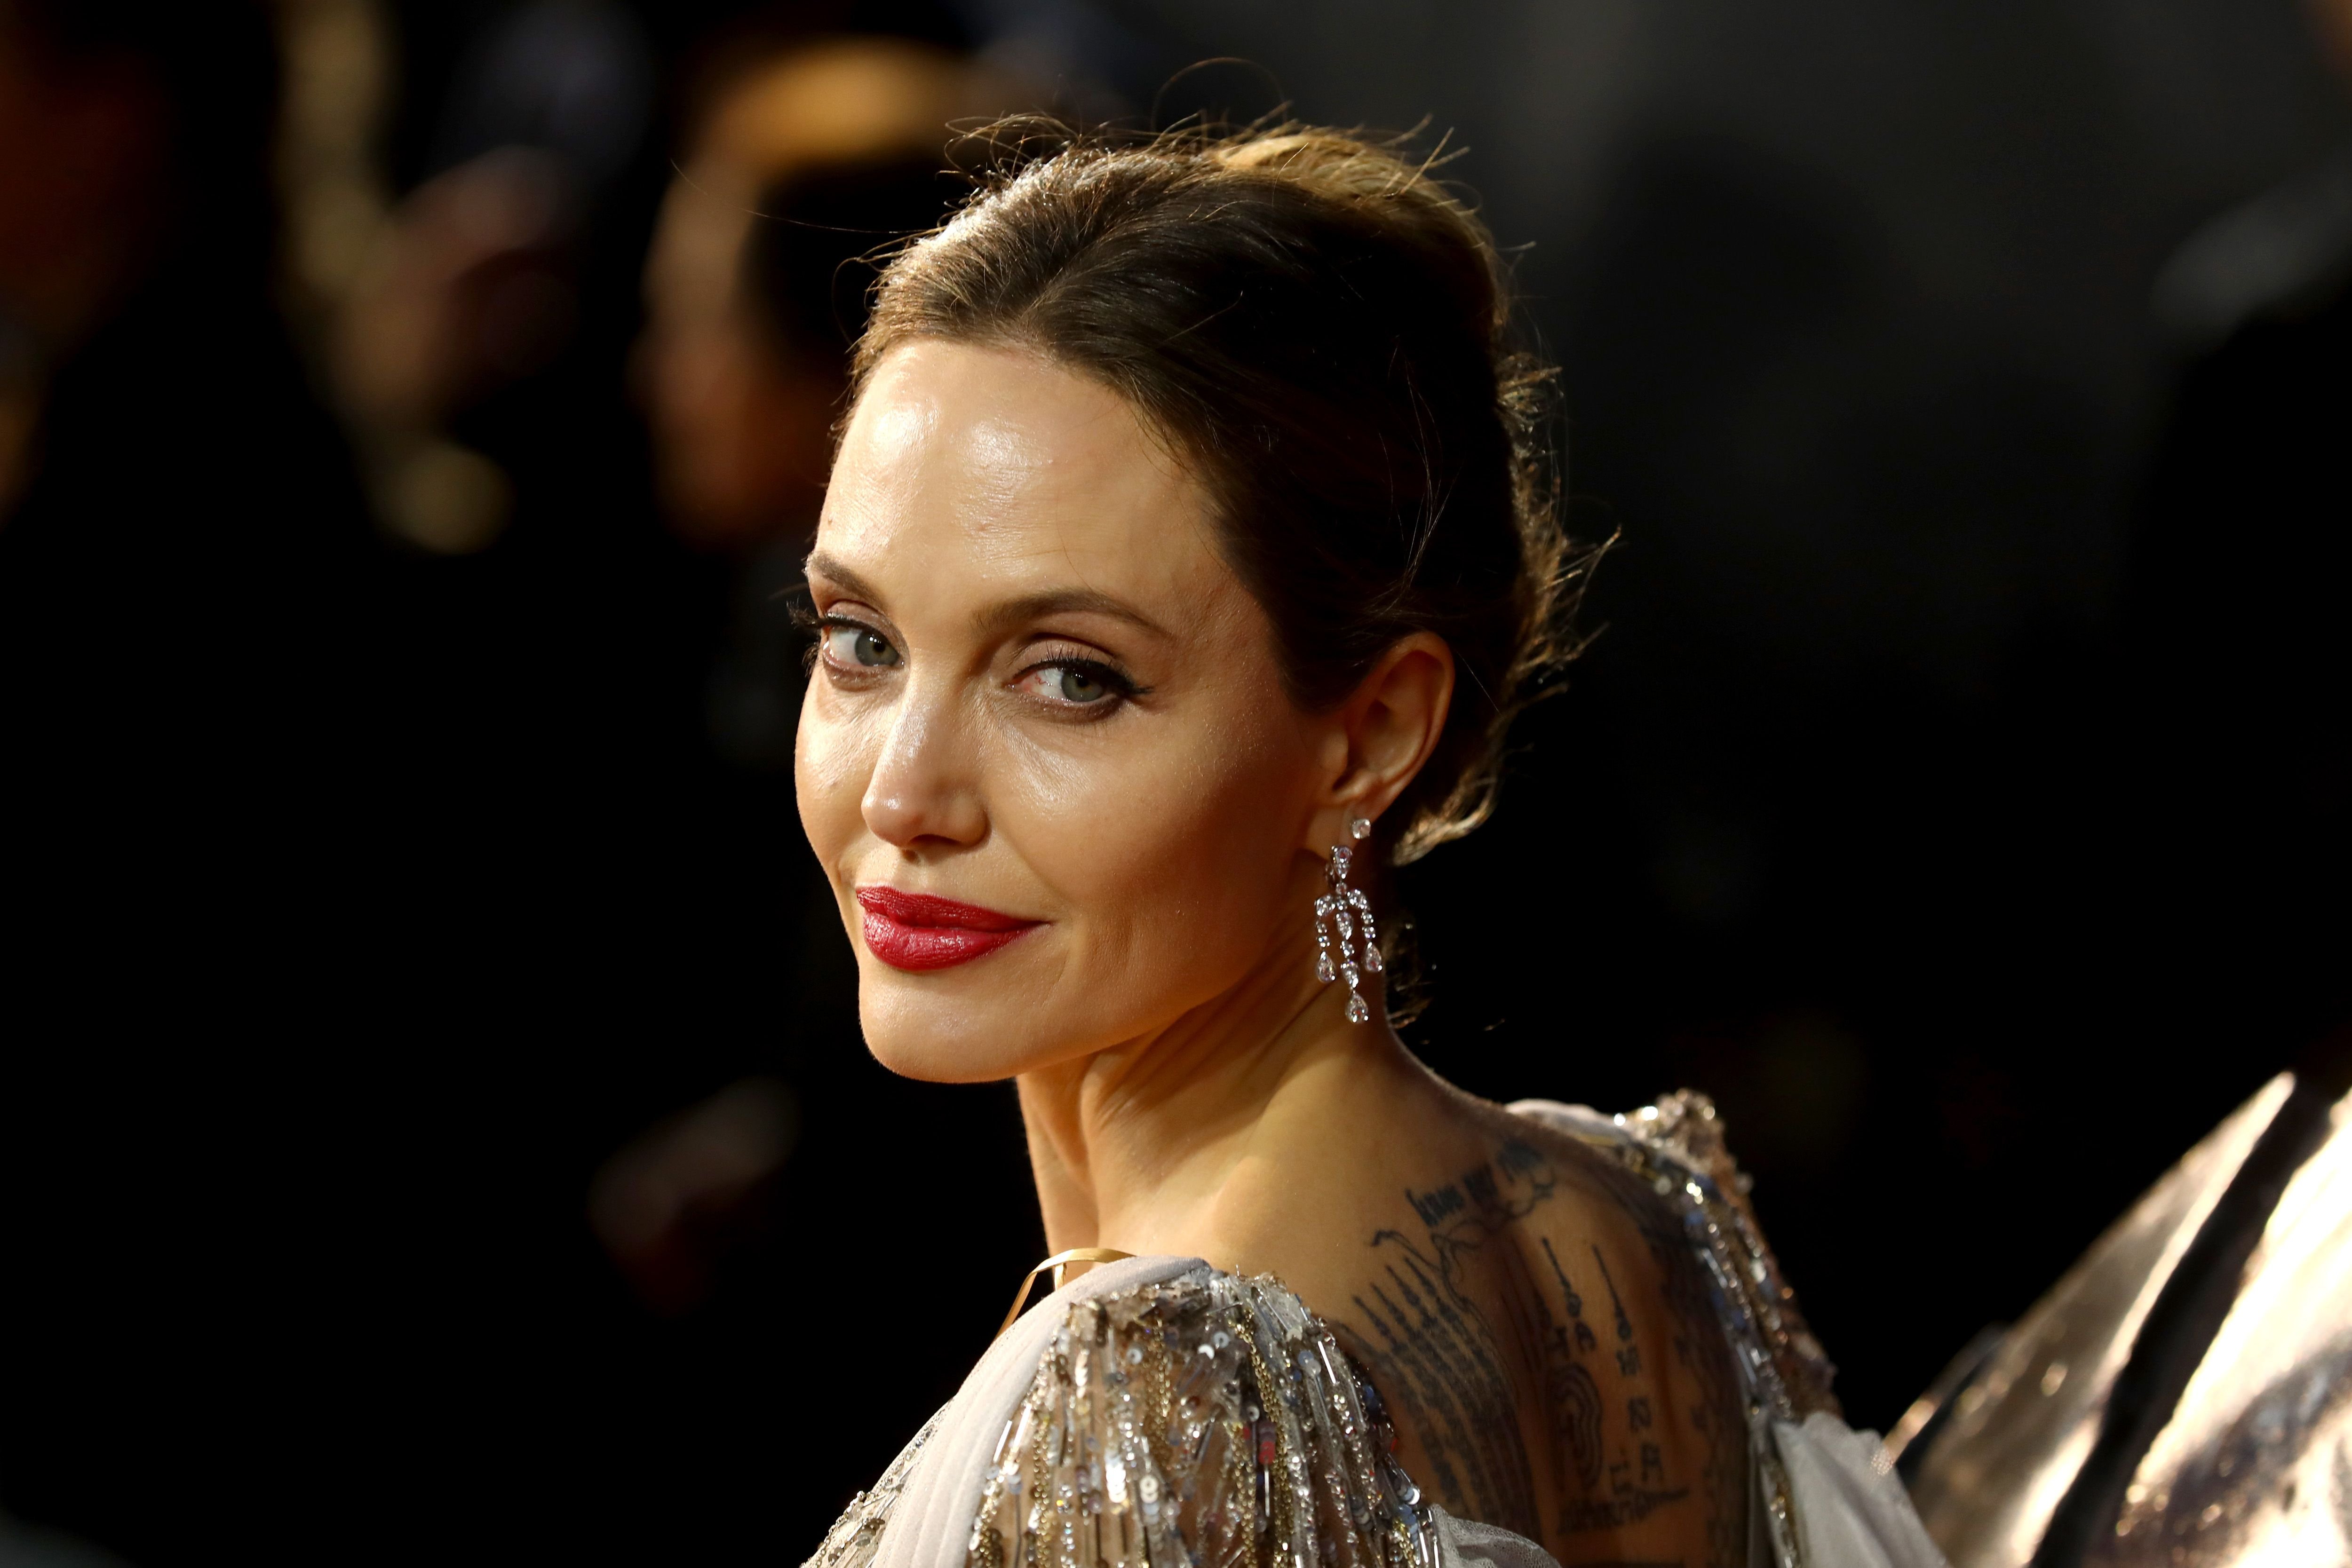 Angelina Jolie at the European premiere of "Maleficent: Mistress of Evil" at Odeon IMAX Waterloo on October 09, 2019. | Photo: Getty Images